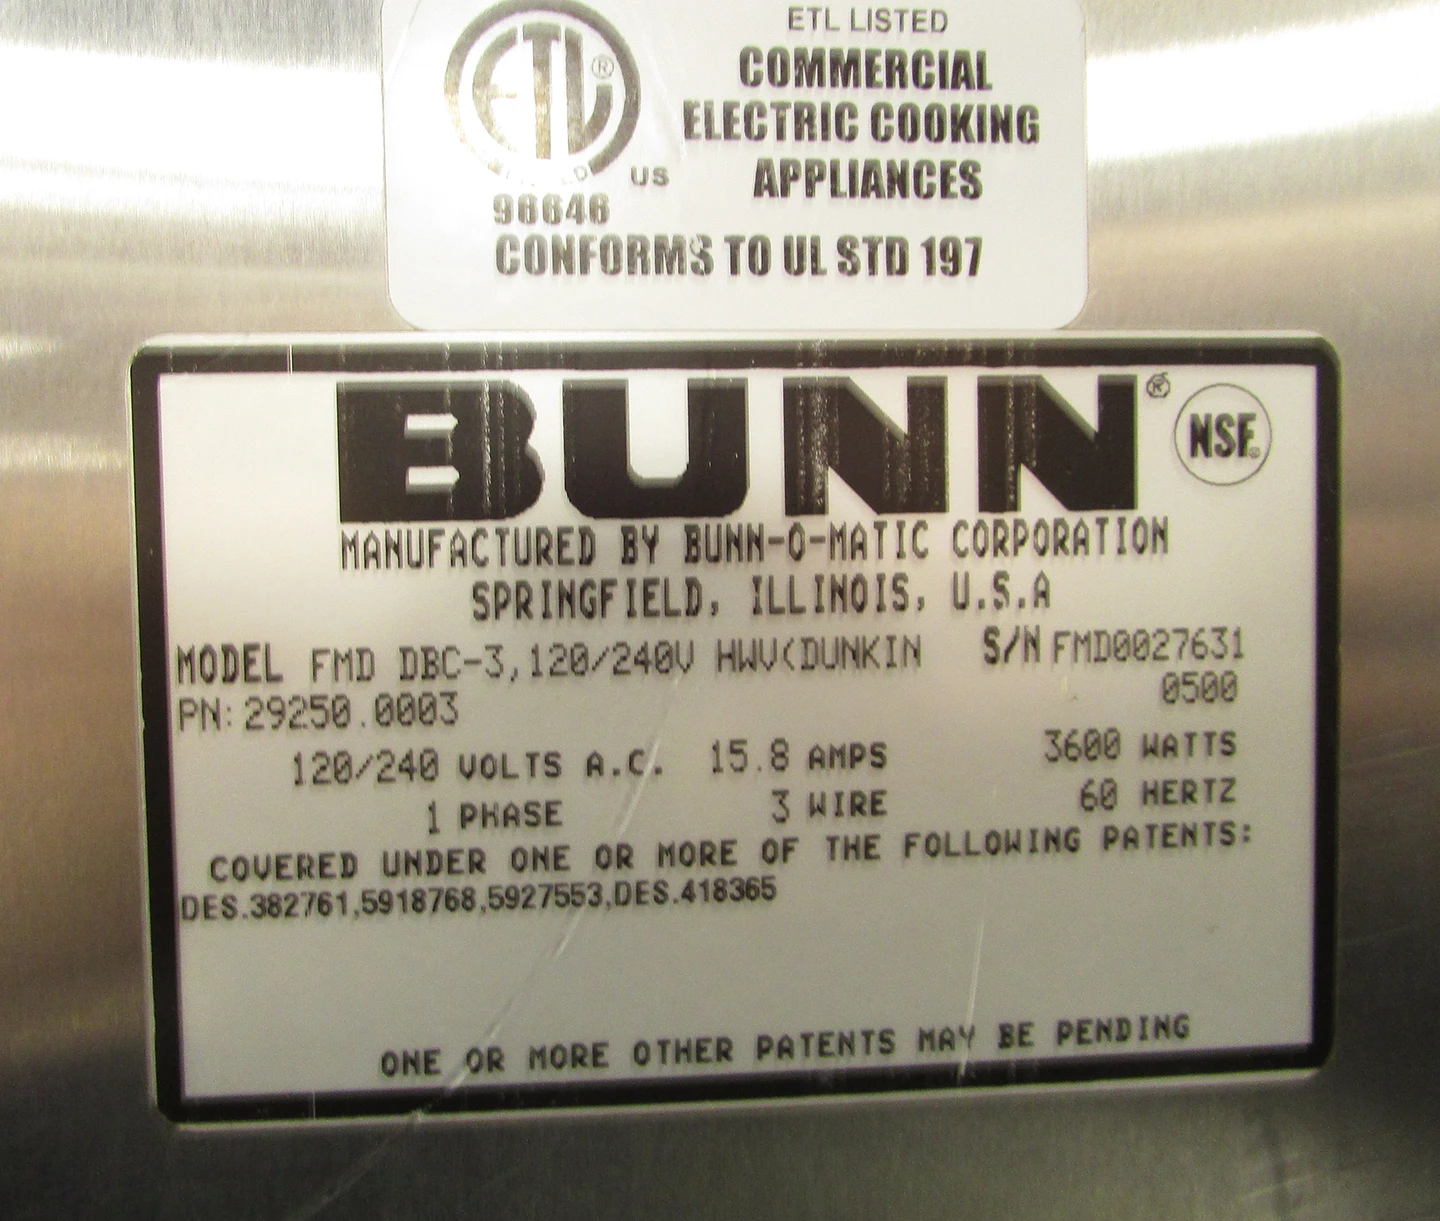 FMD-3 Black - Hot Chocolate/Cappuccino - BUNN Commercial Site